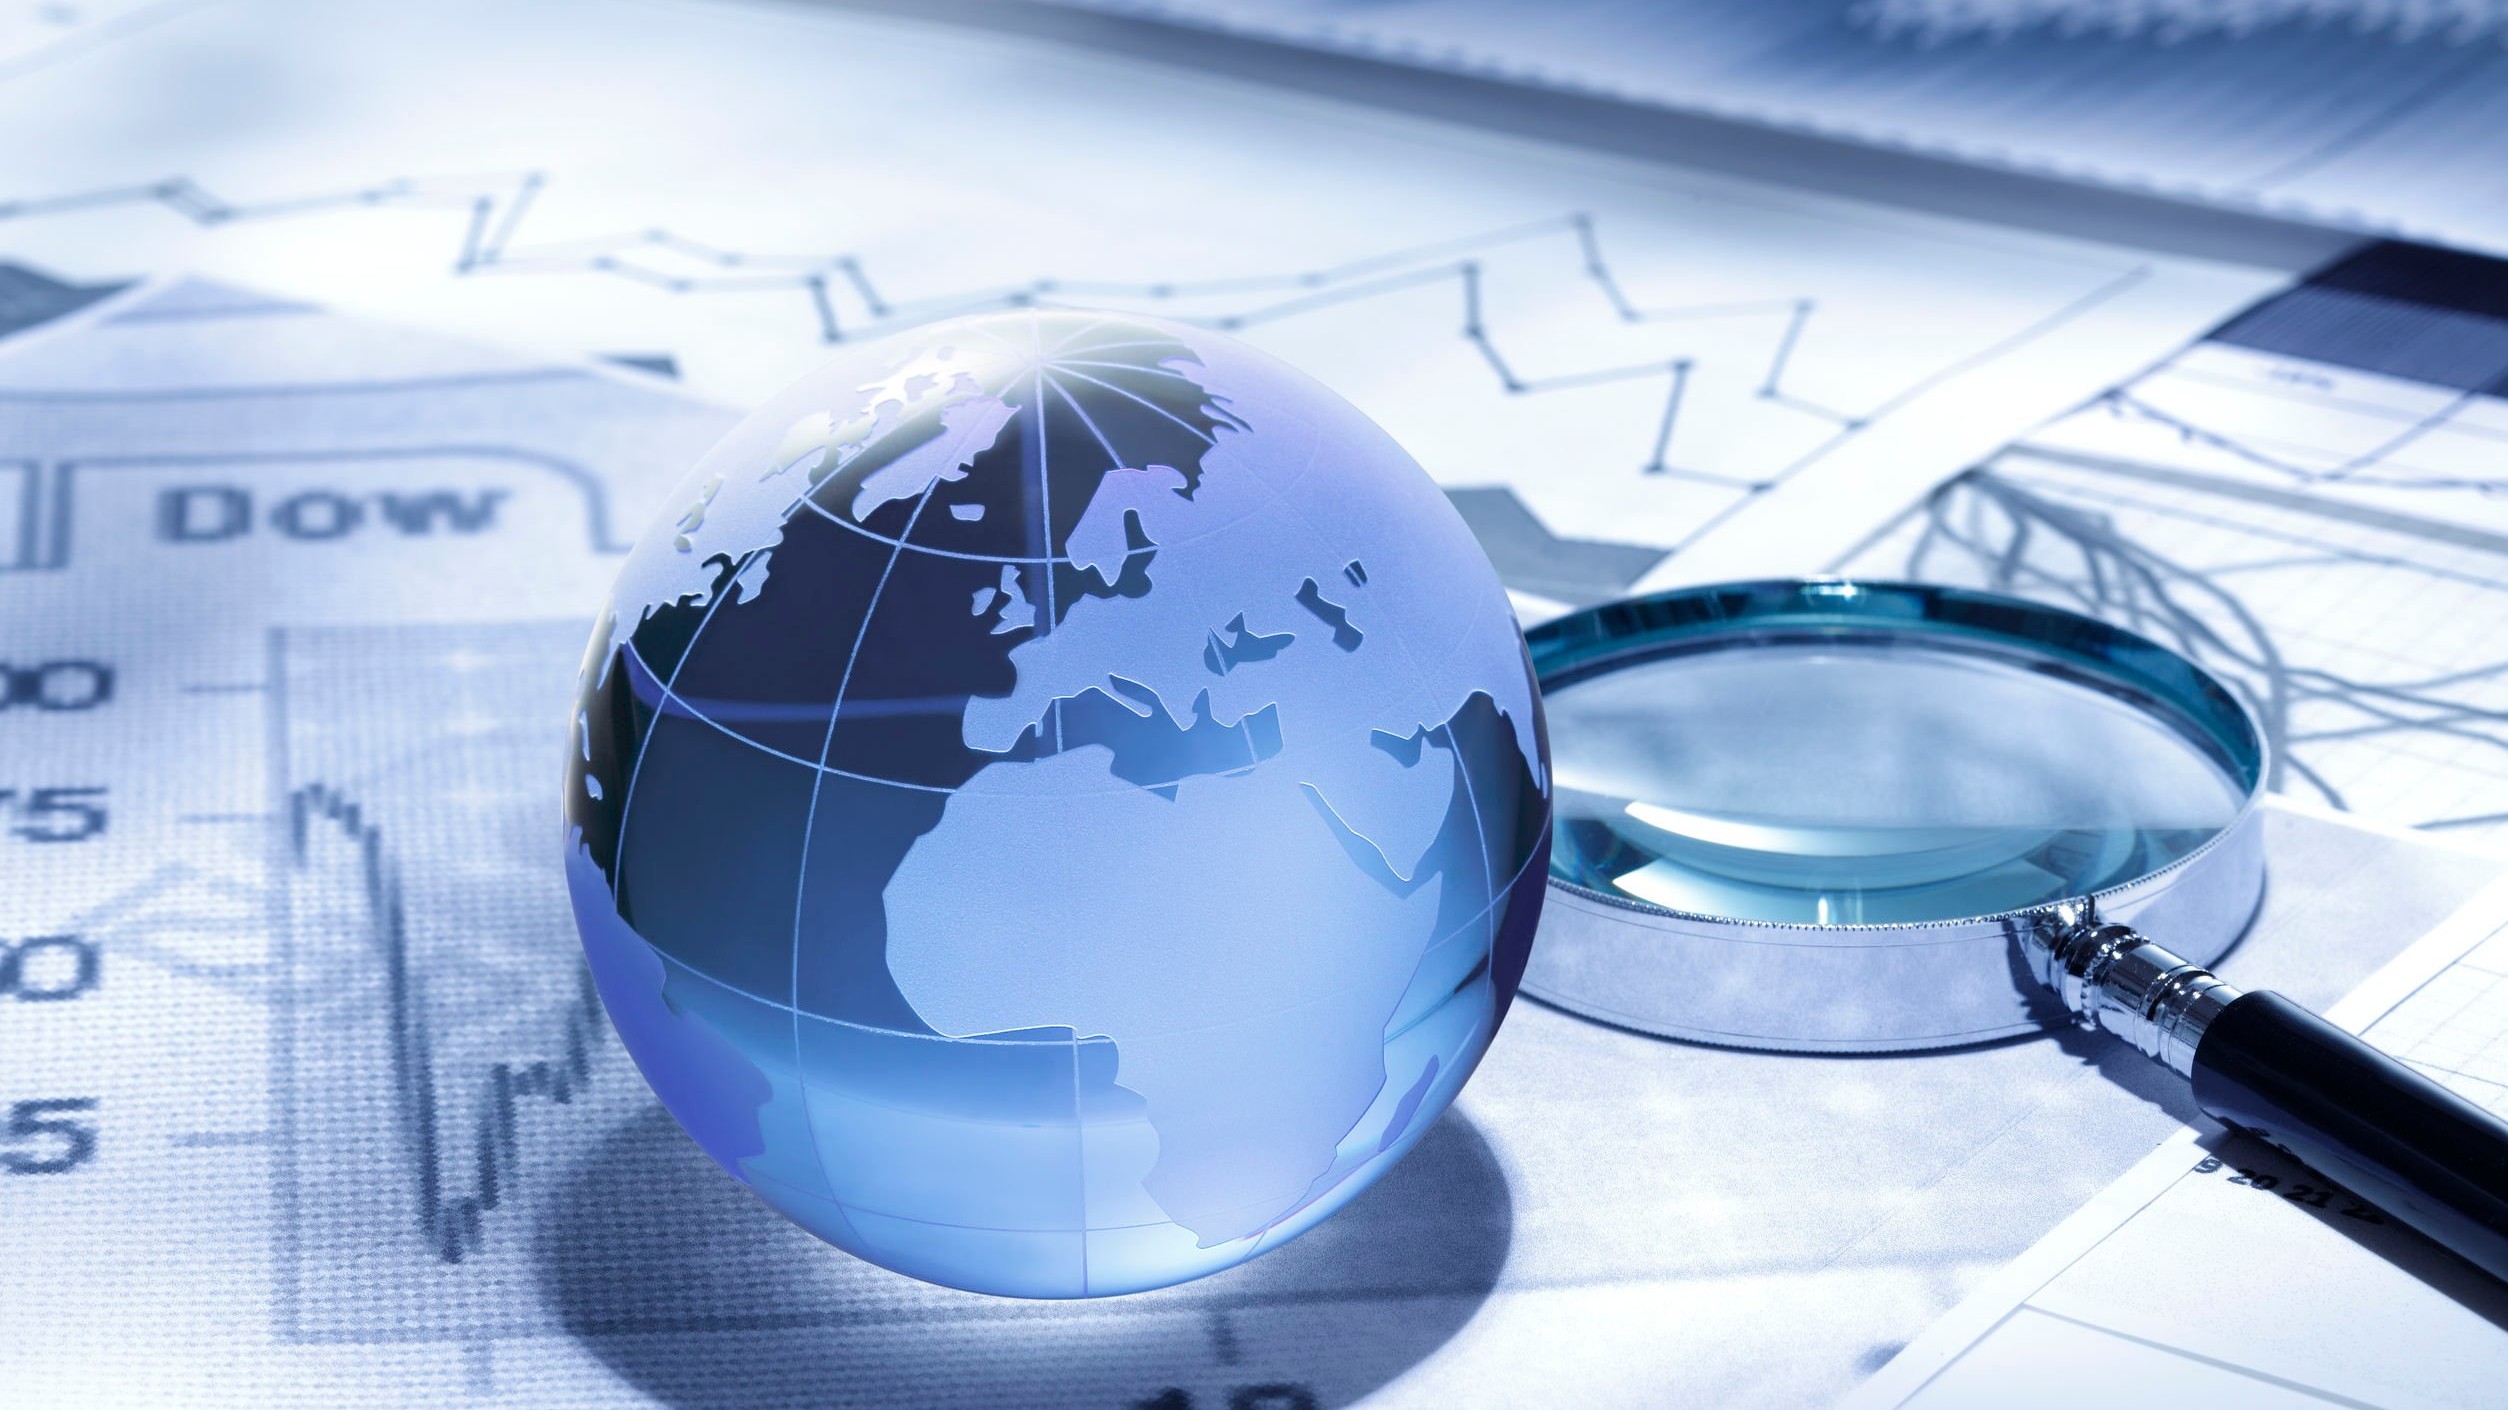 Digital collage with a globe and magnifying glass on top of market reports, all with a blue tint.